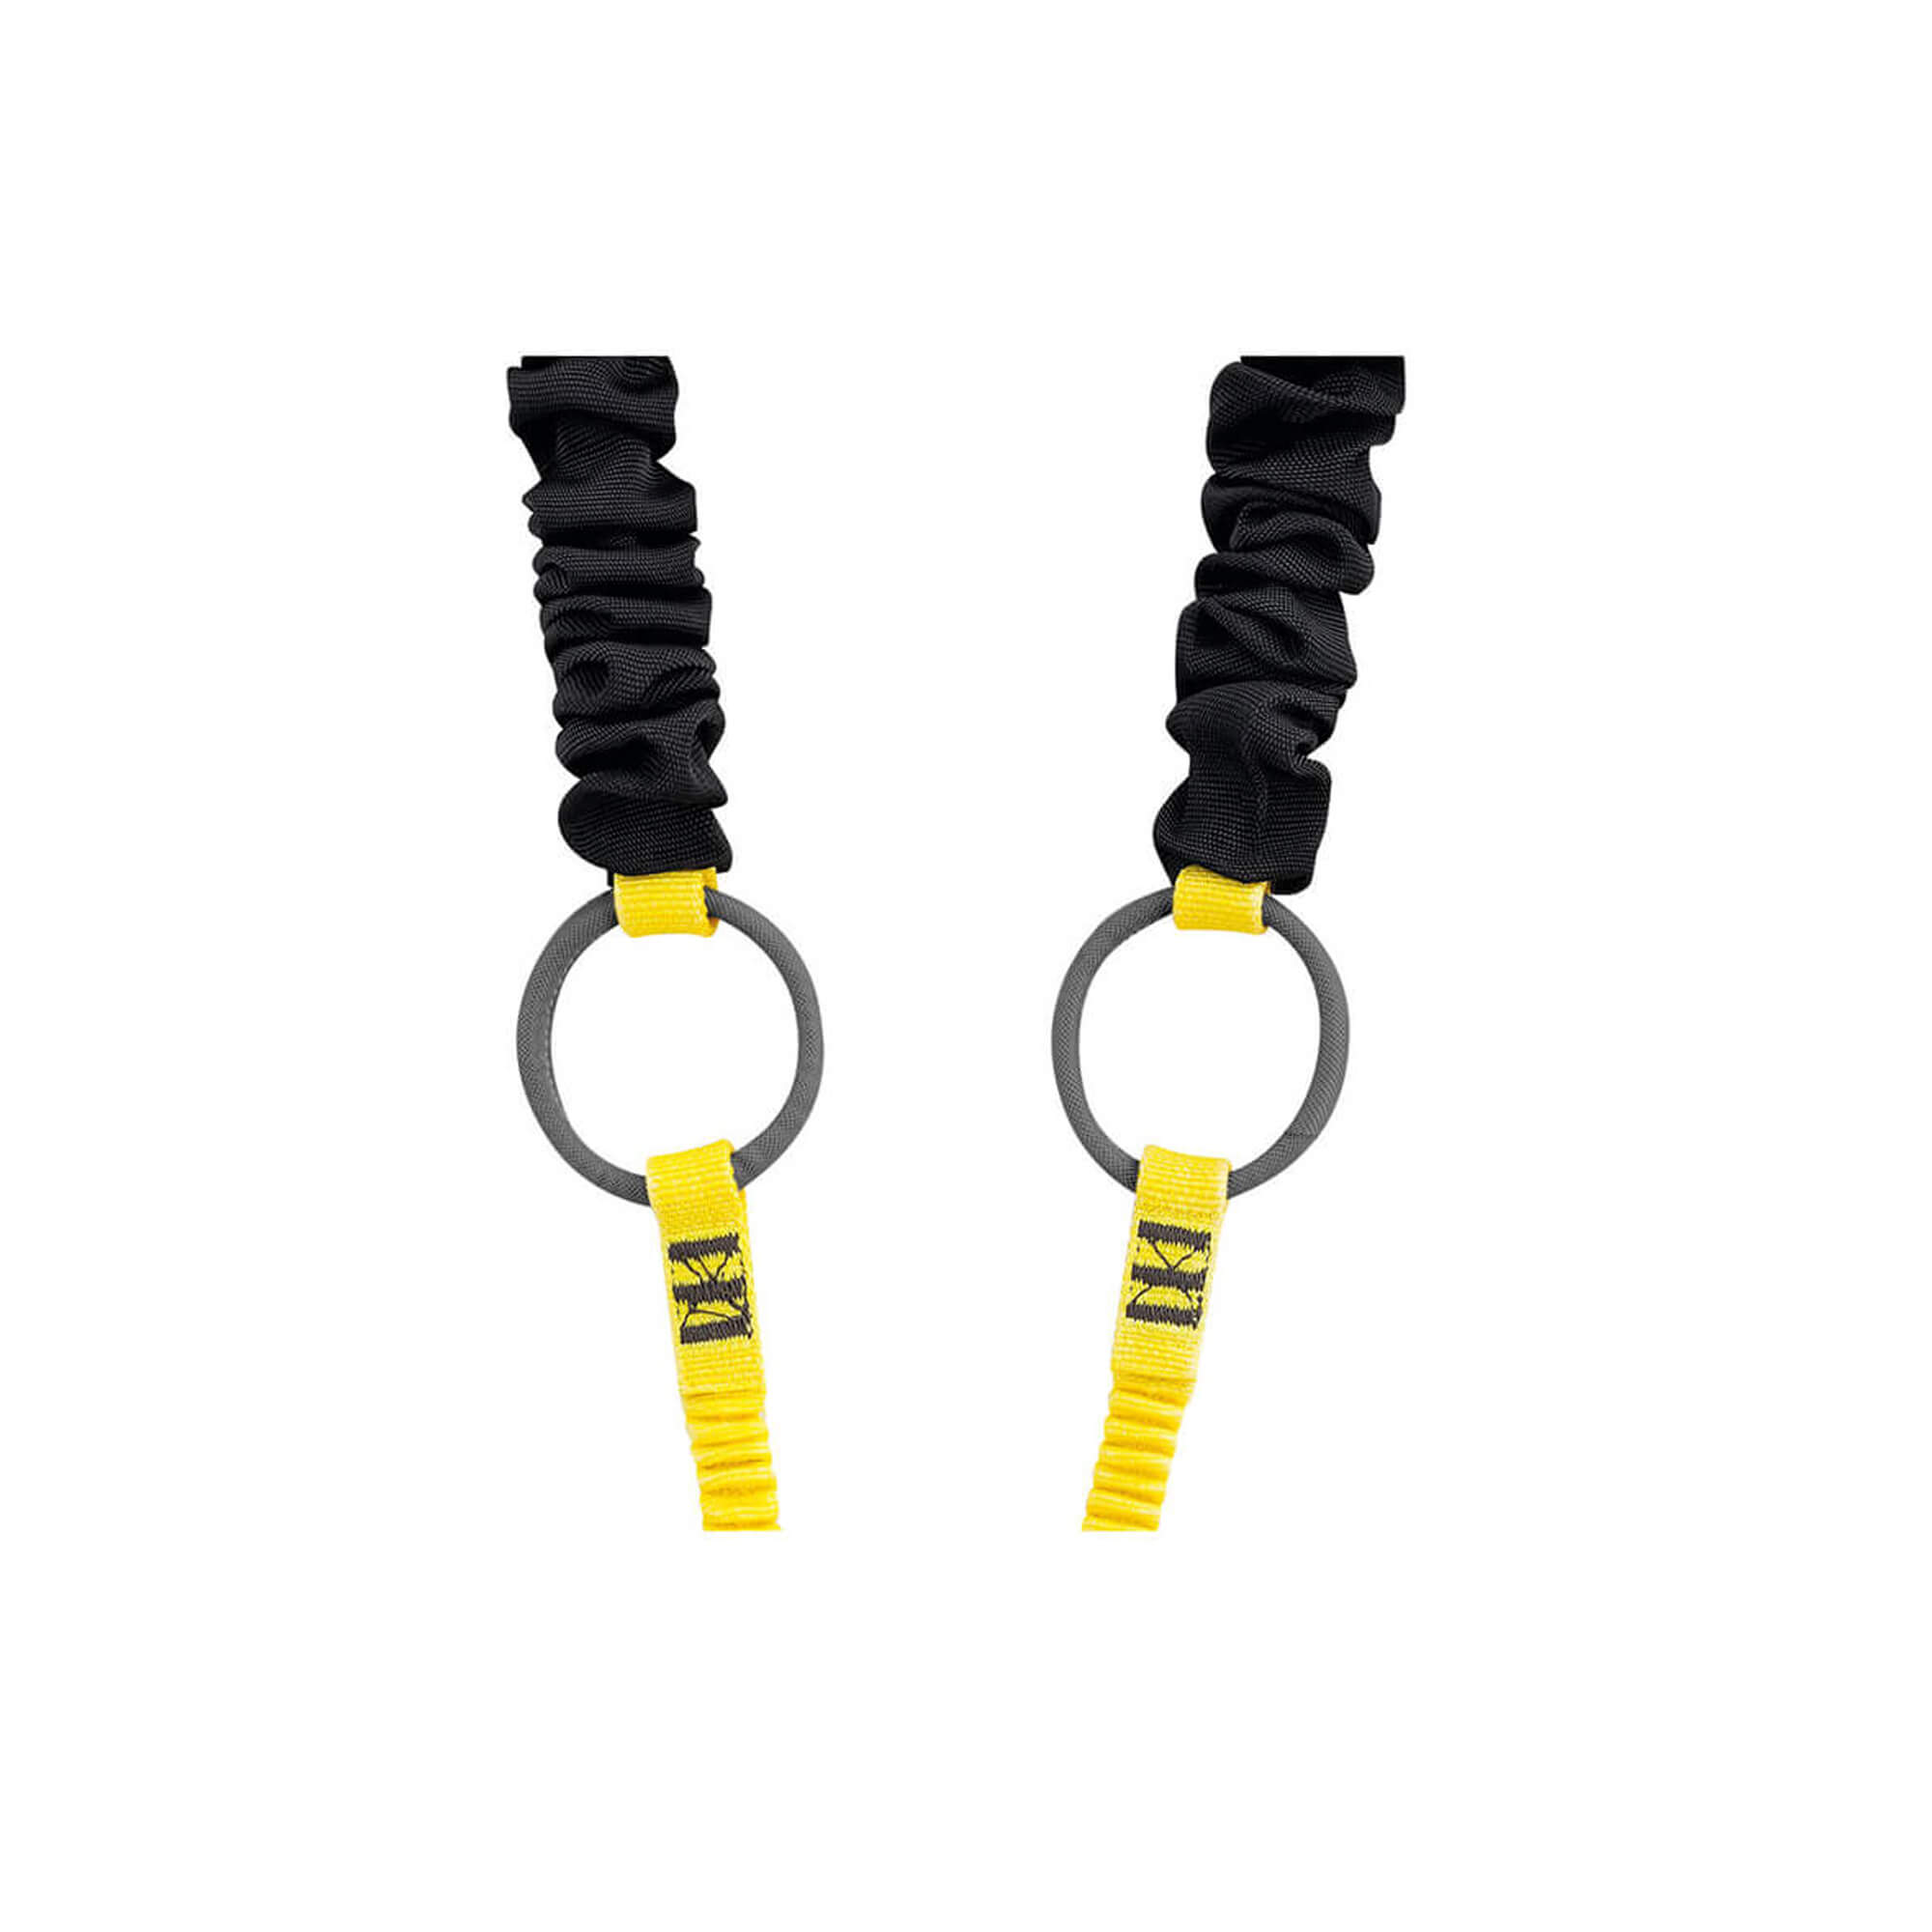 Double lanyard with integrated energy absorber Apsorbica-Y, MGO, 80 cm, Petzl